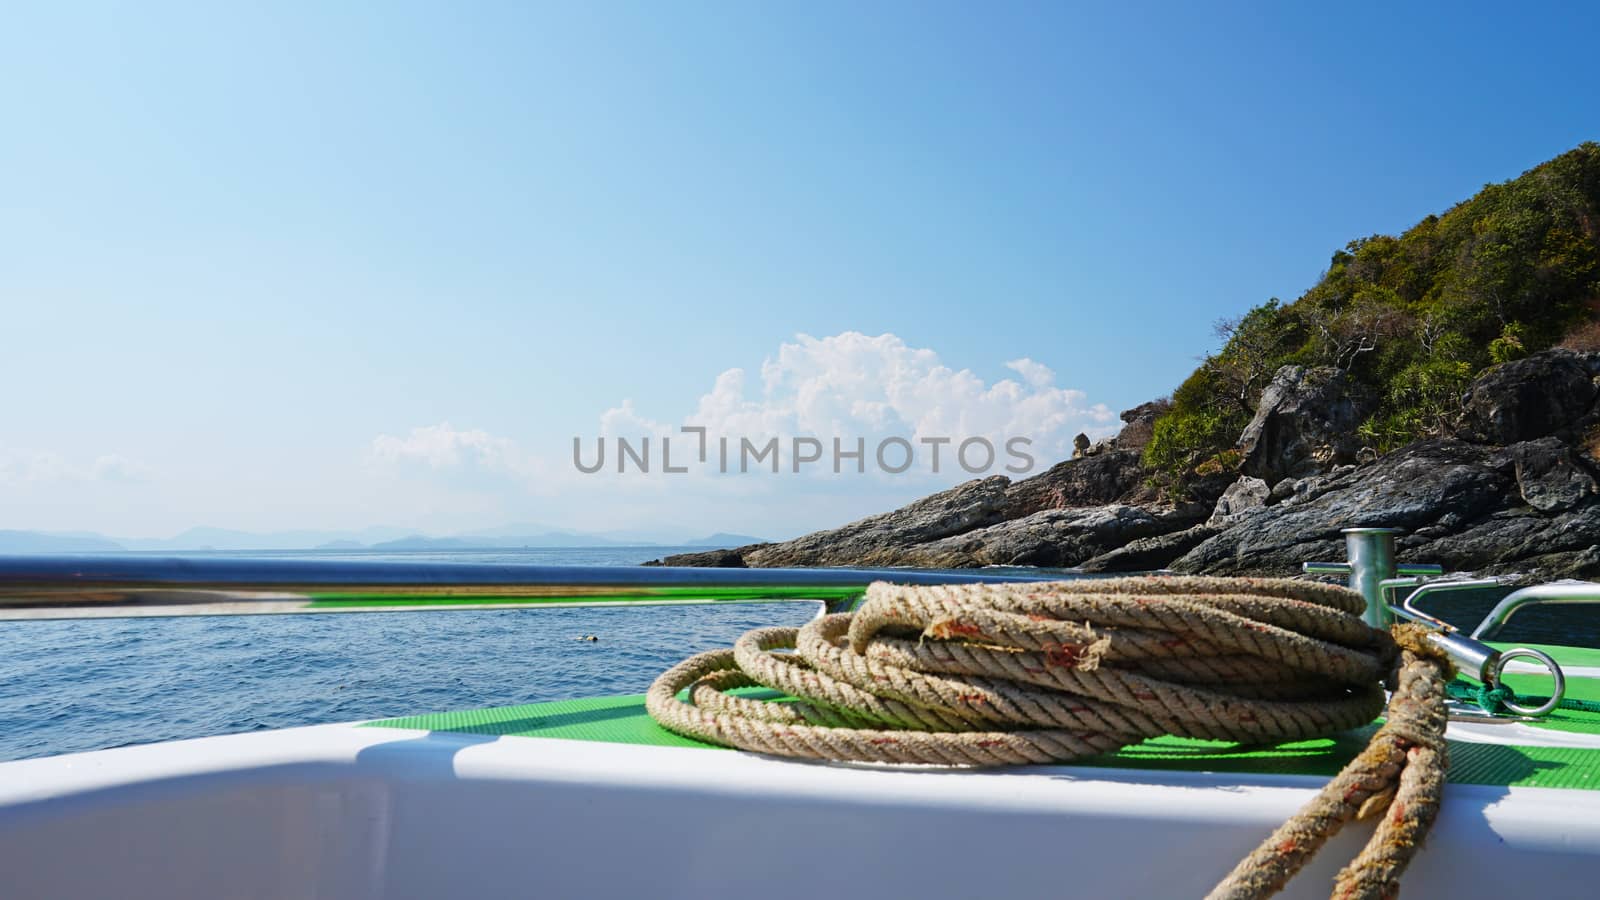 View of the bow of a fast boat with a rope. The metal rim glitters. It offers a landscape on the blue sea, a green island with trees and large stones. In the distance the blue sky with white clouds.